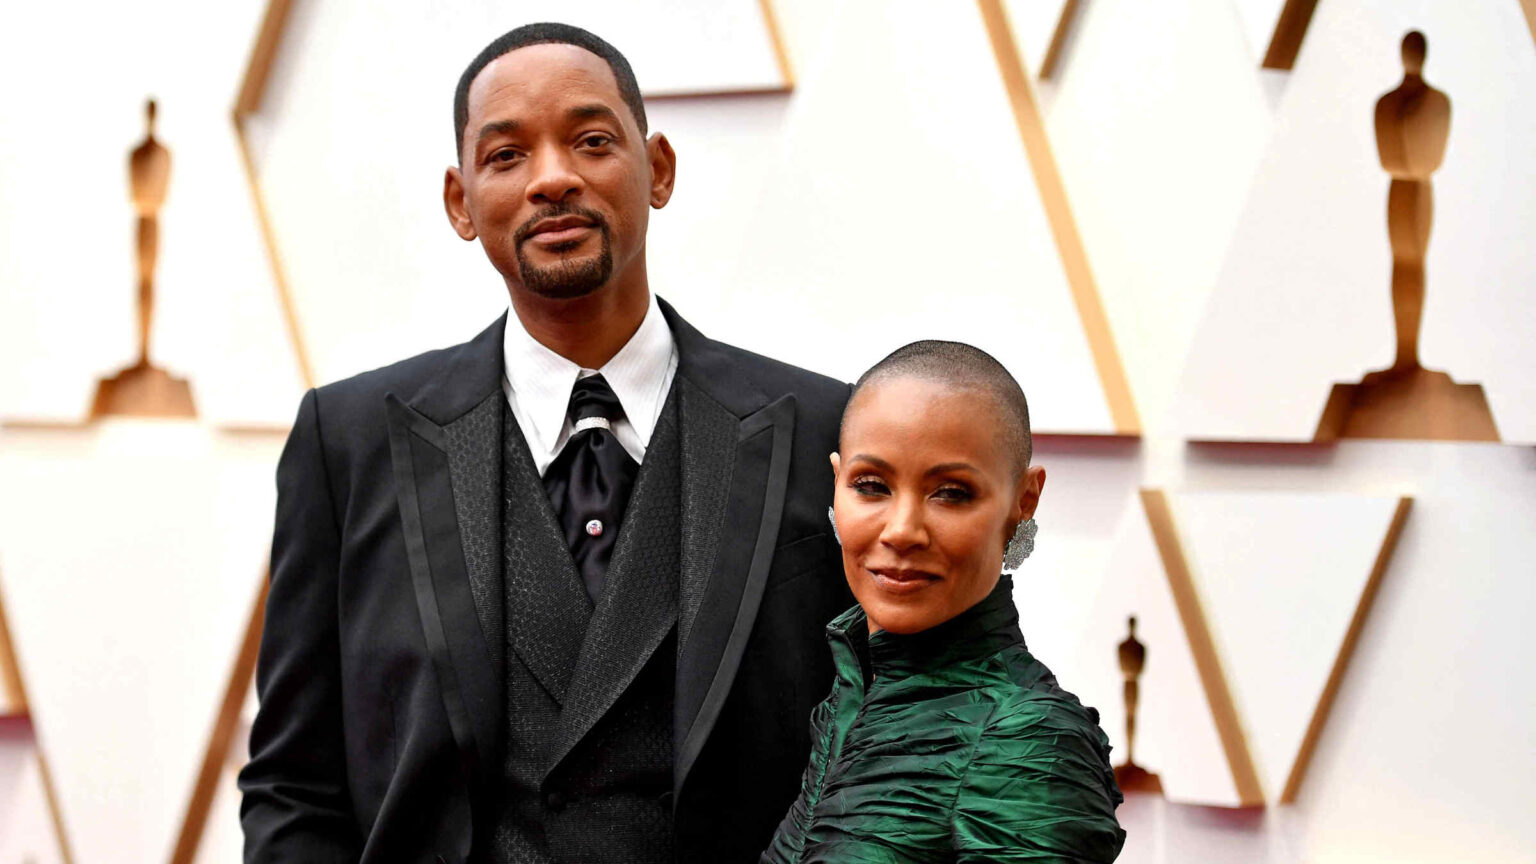 Will Smith laughed at Chris Rock's joke about Jada Pinkett until he saw her reaction. It's left people wondering if she told him to go after the comedian.